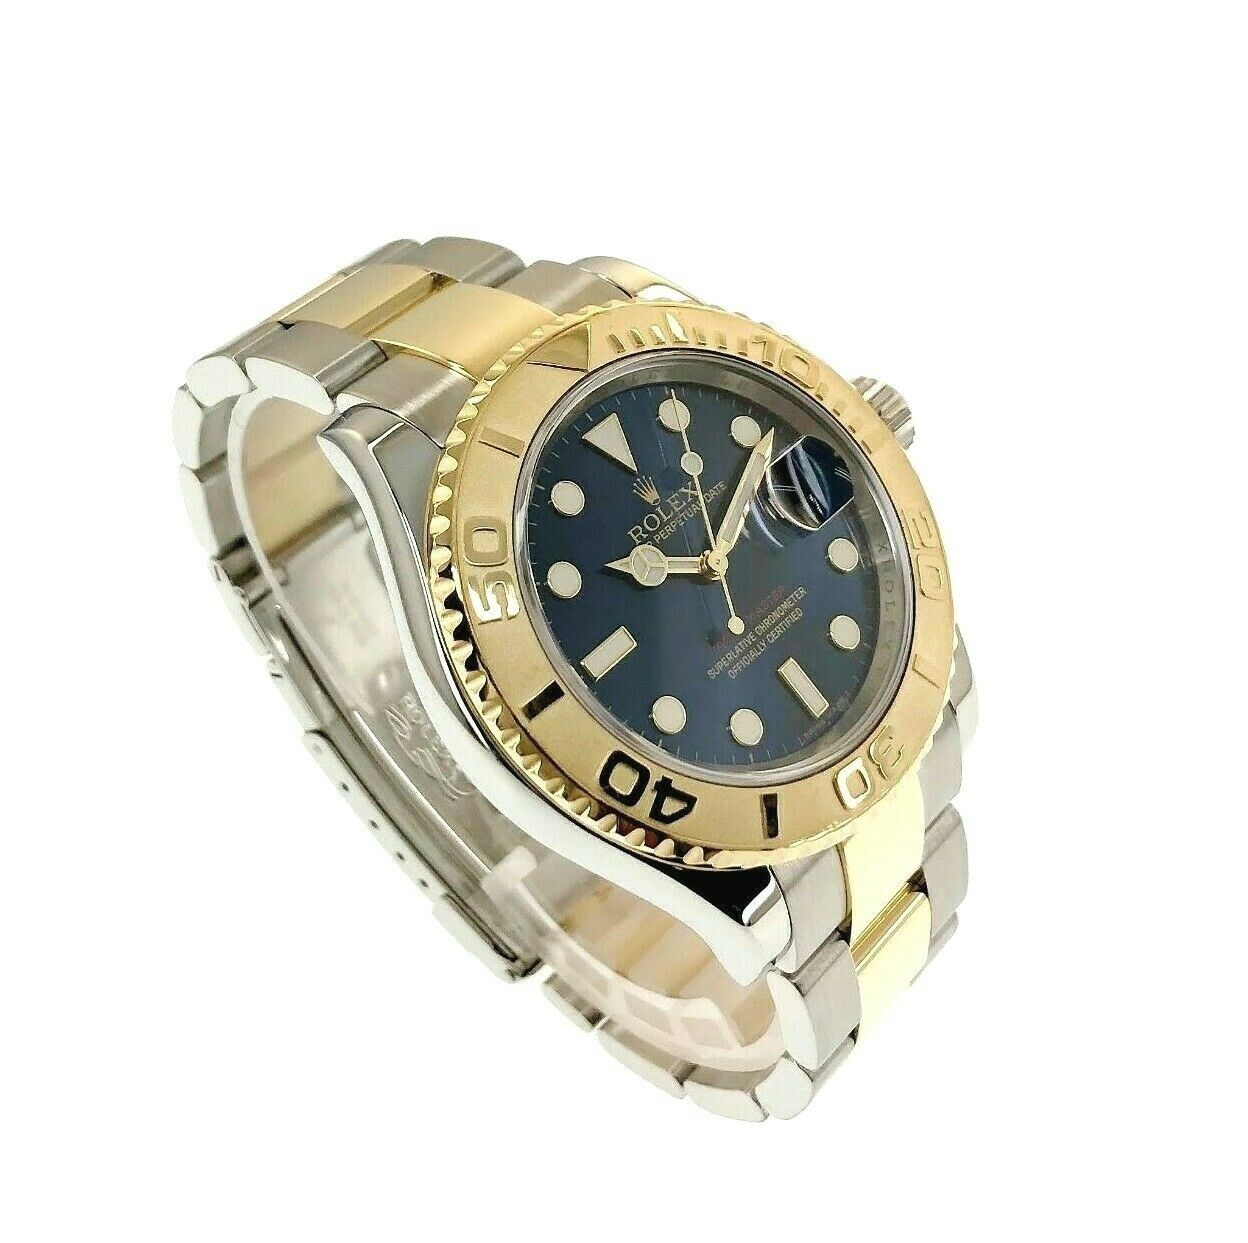 Rolex 40MM Mens Yacht-Master 18K YellowGold and Steel Watch Ref # 16623 P Serial